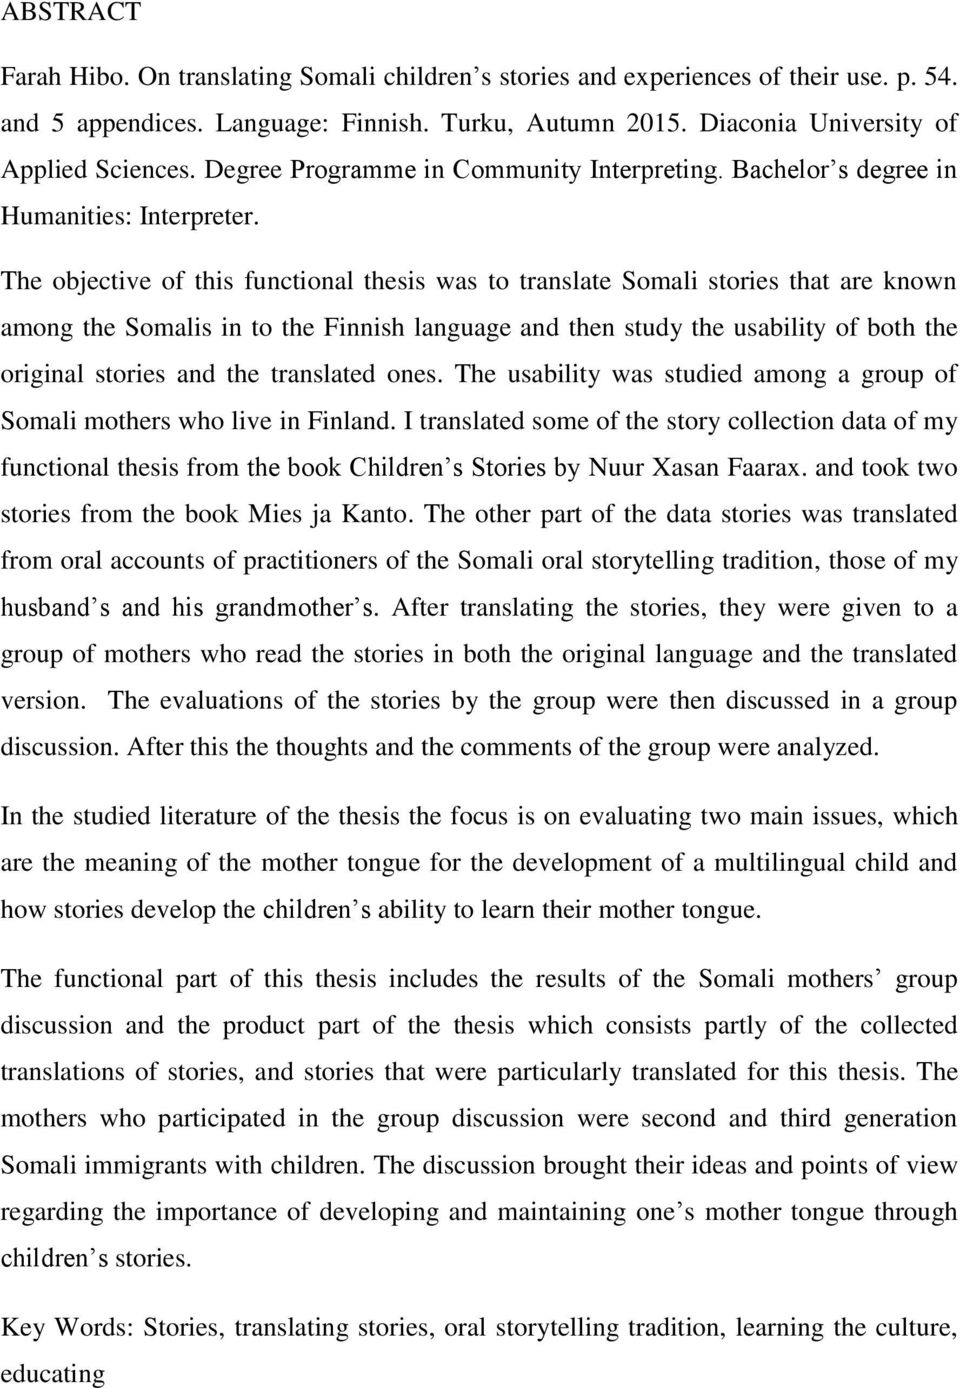 The objective of this functional thesis was to translate Somali stories that are known among the Somalis in to the Finnish language and then study the usability of both the original stories and the